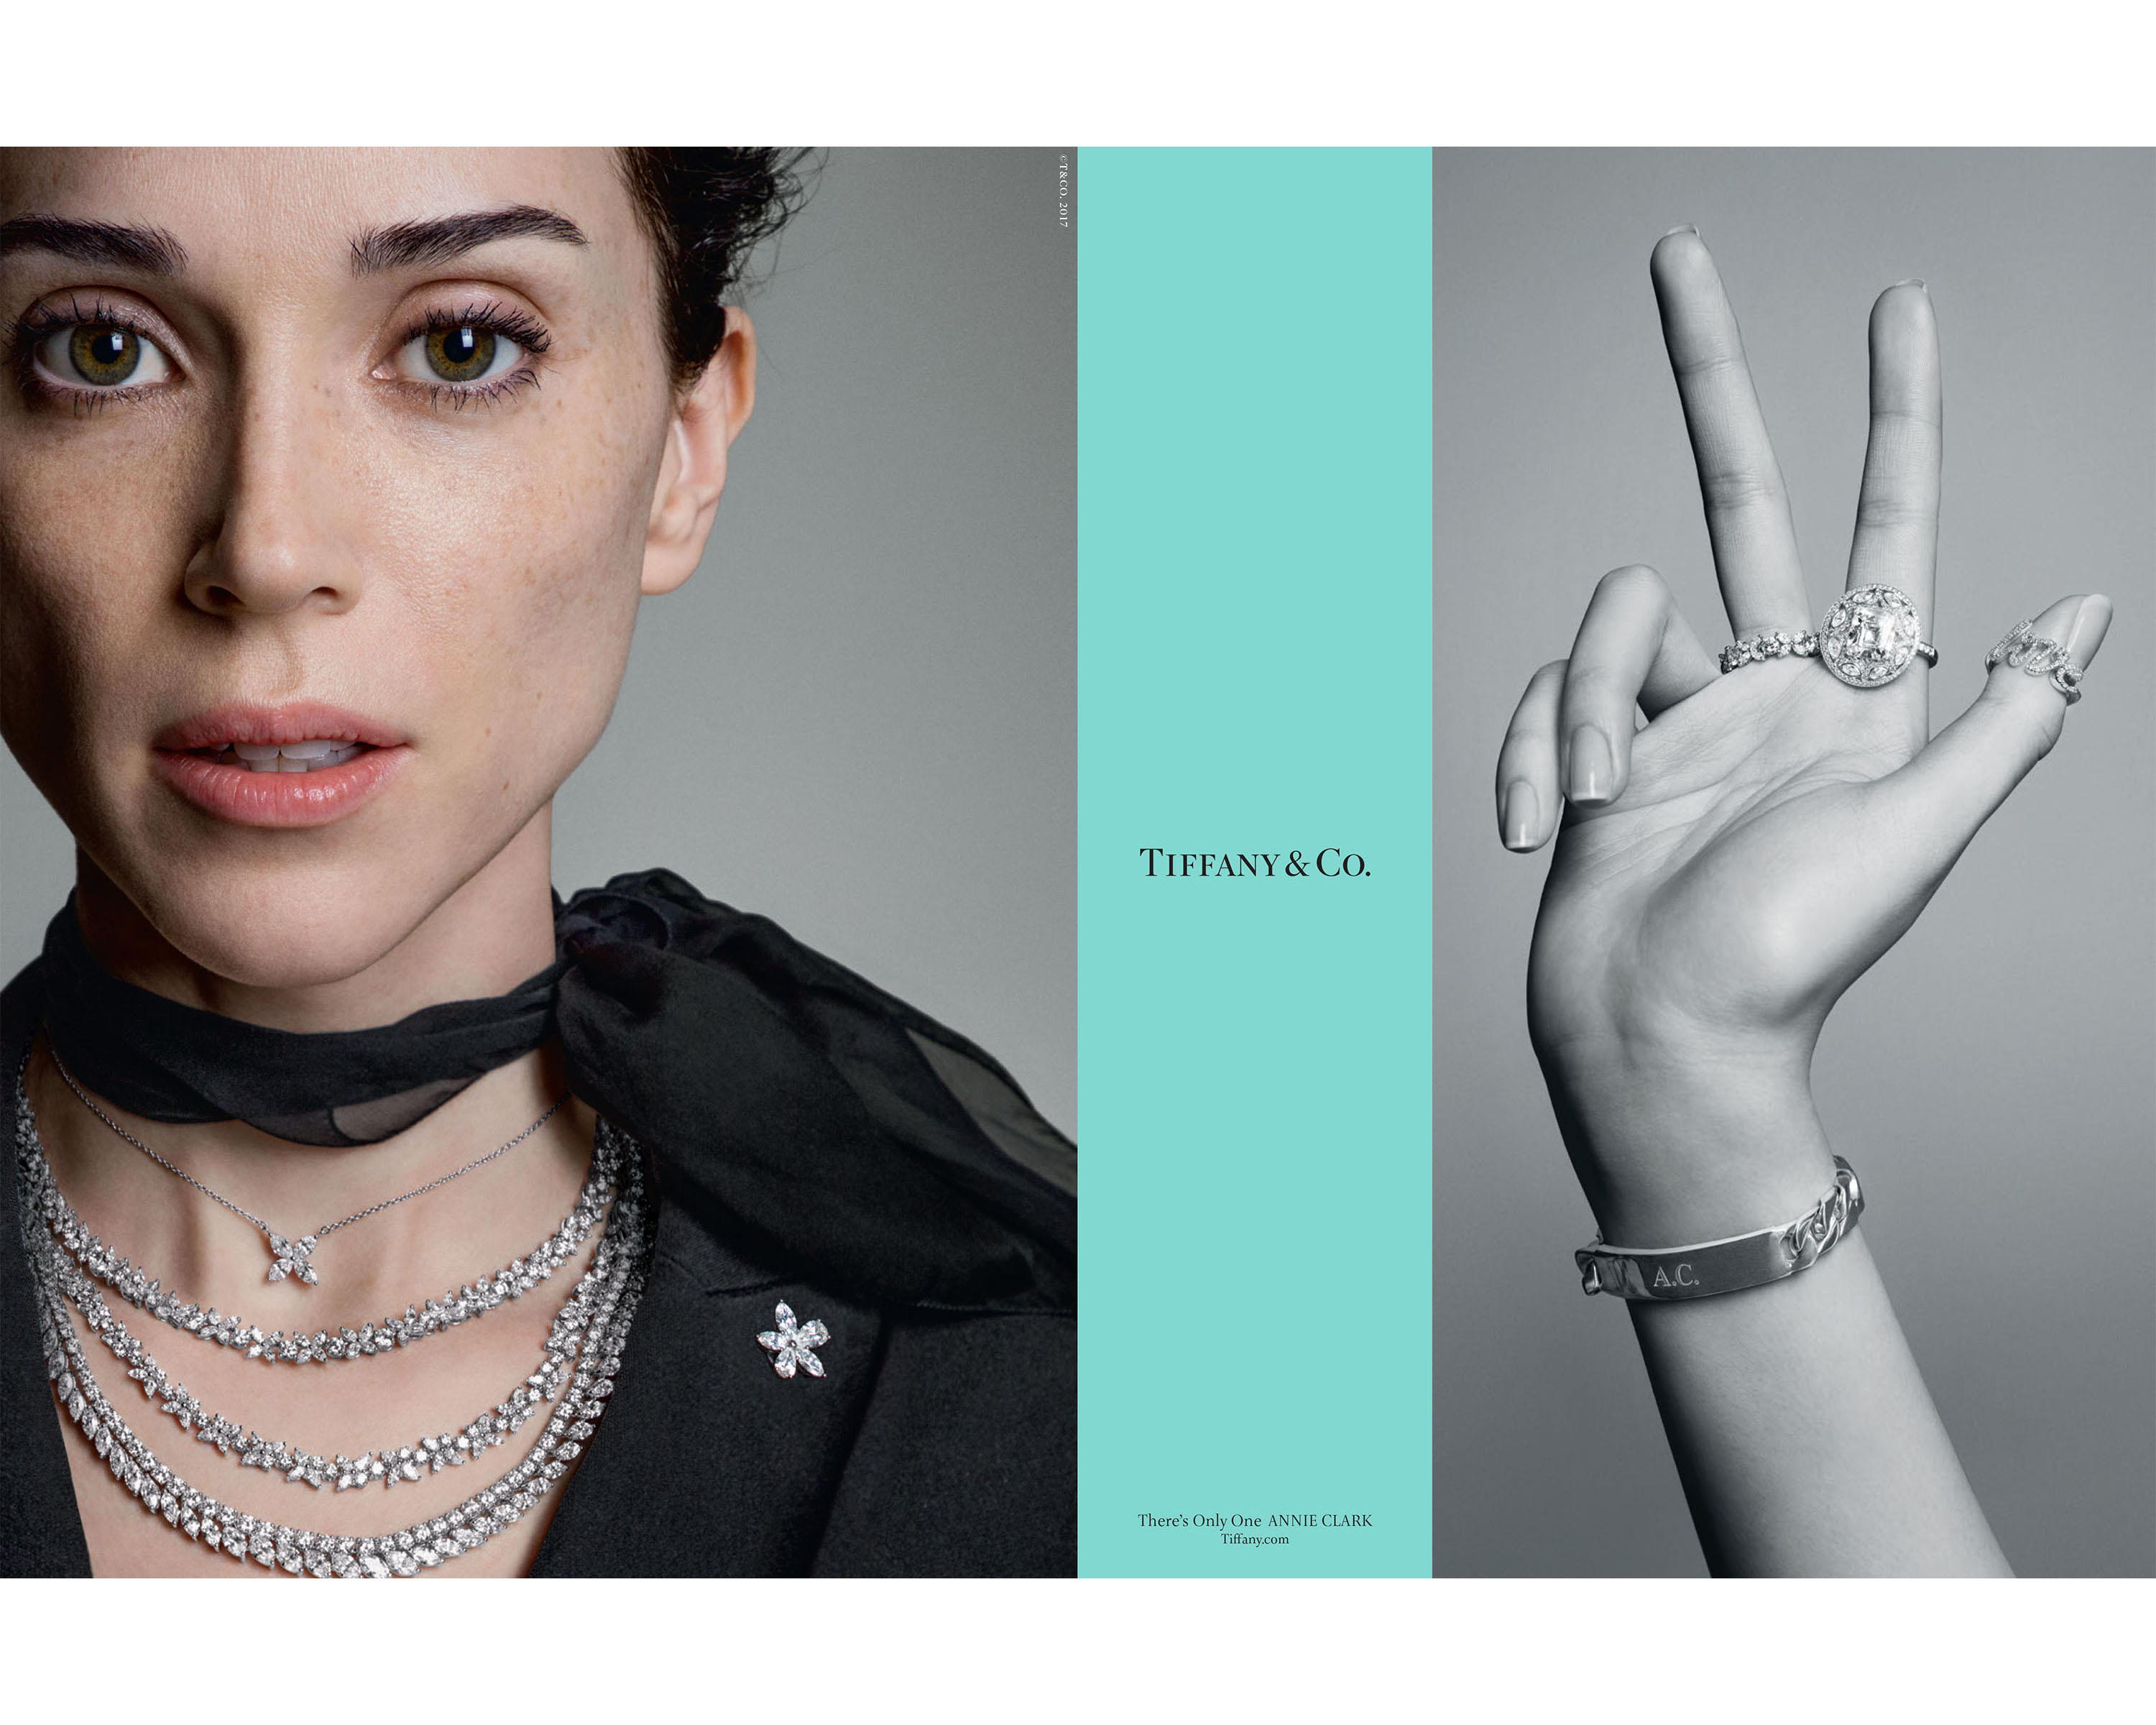 St. Vincent with Tiffany&Co.